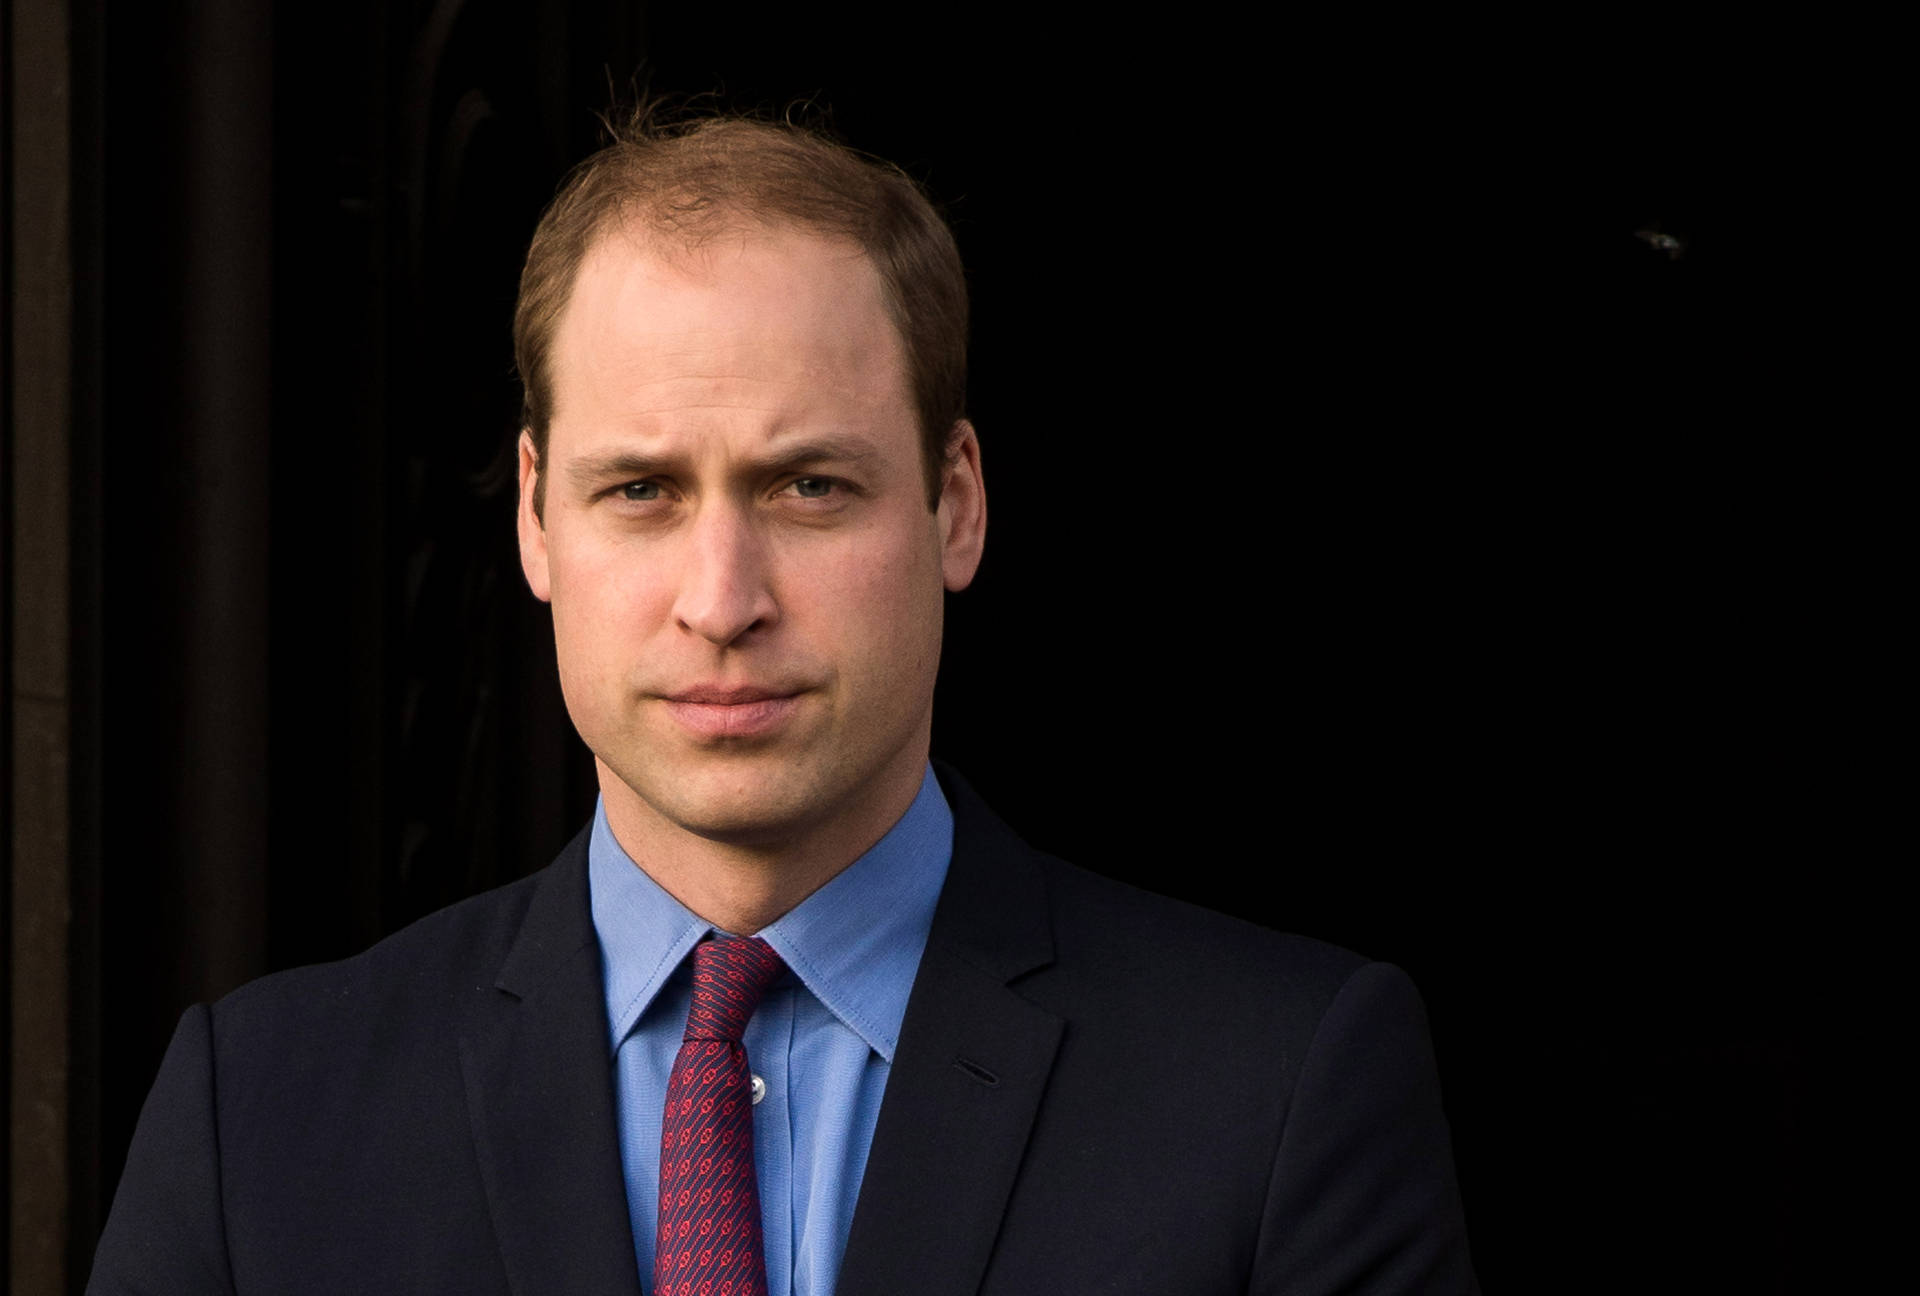 Prince William With Serious Expression Wallpaper